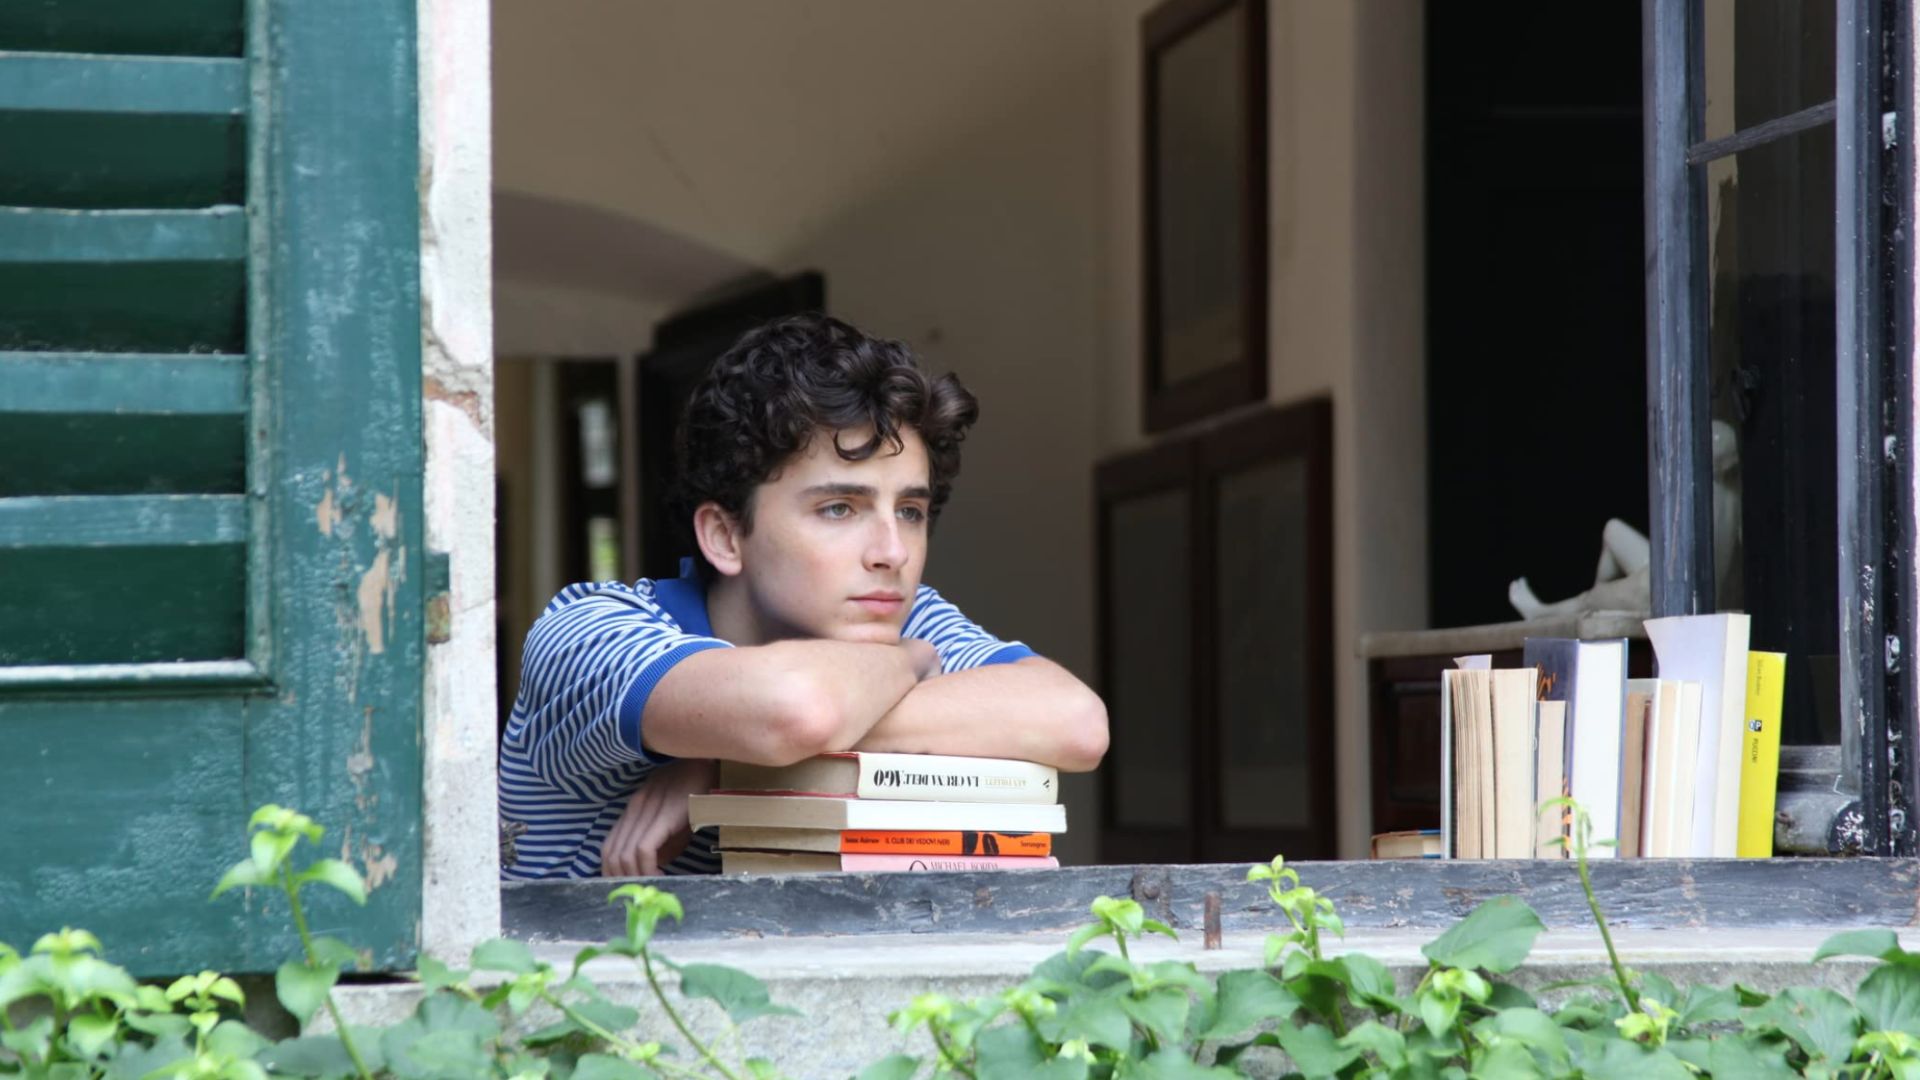 Elio looks out the window, resting his chin over his crossed arms on a stack of books in this image from Sony Pictures Classics